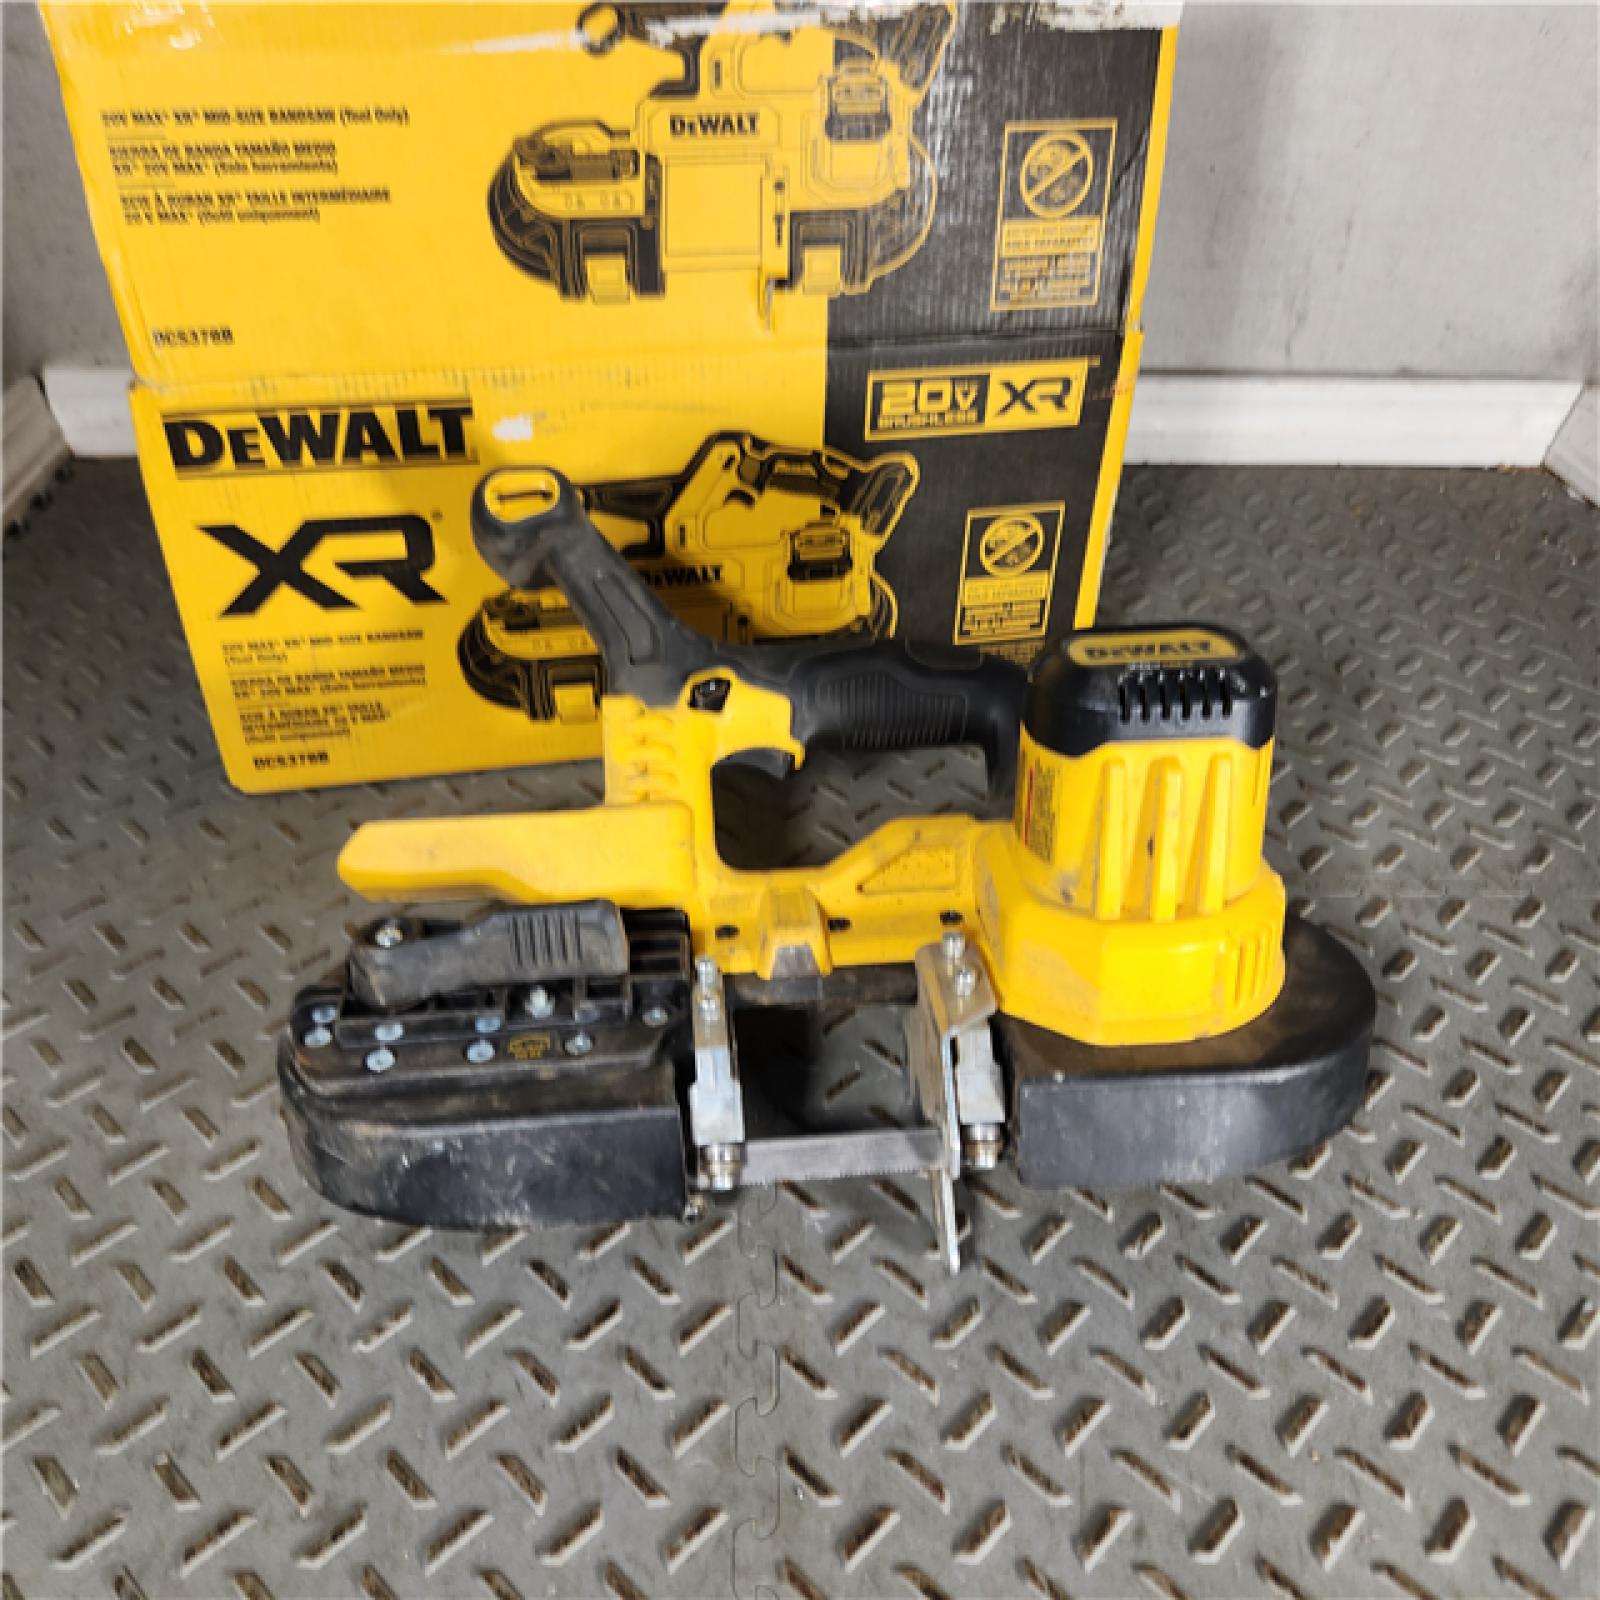 Houston location- AS-IS DEWALT 20V MAX XR MID-SIZE BANDSAW (TOOL-ONLY)